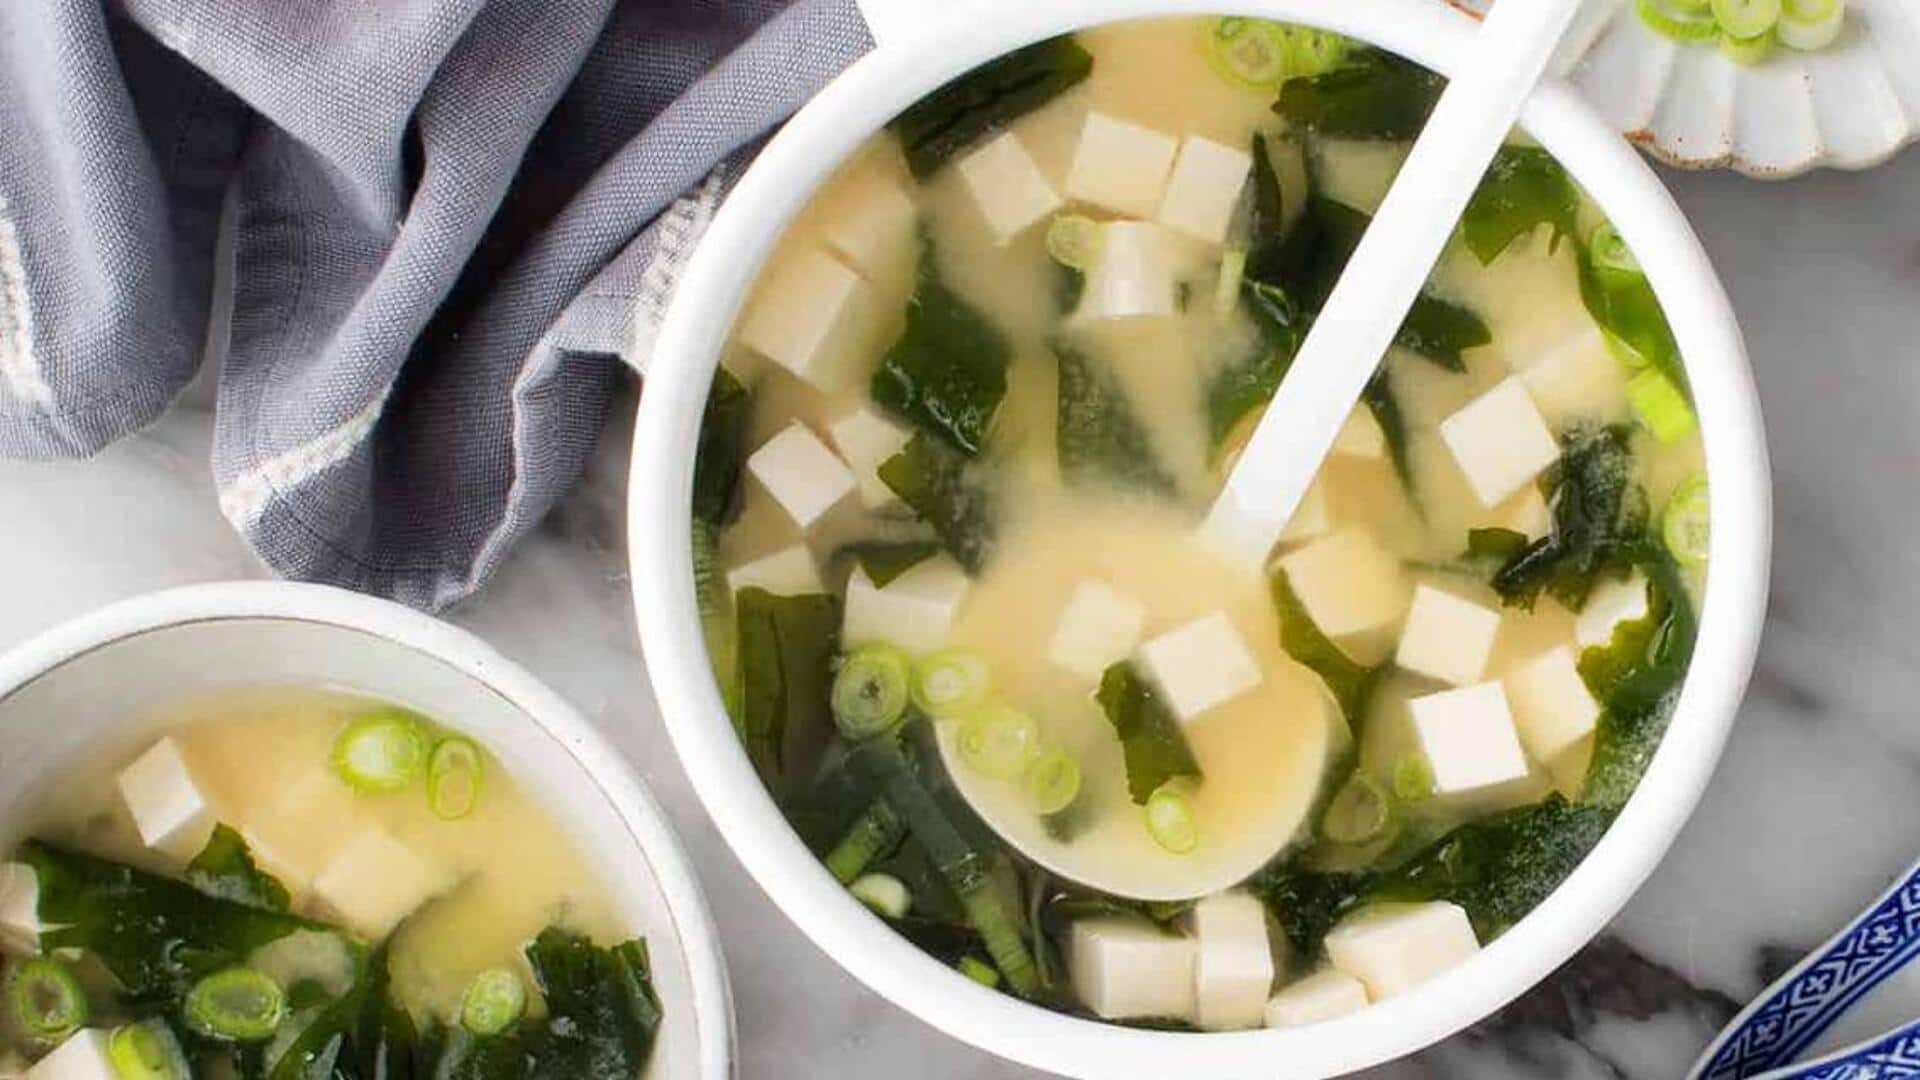 Try this traditional Japanese miso soup recipe at home